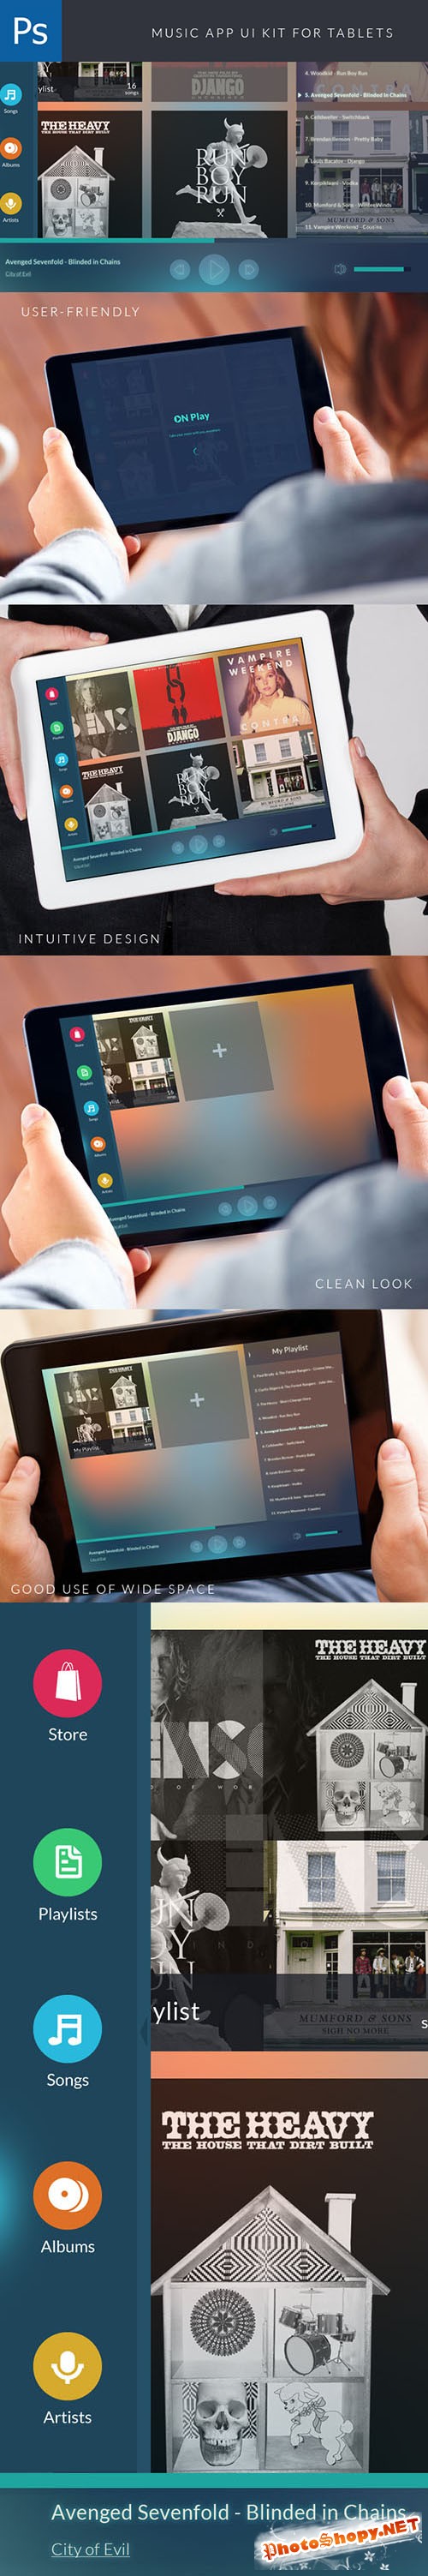 Music App User Interface for Tablets PSD Template